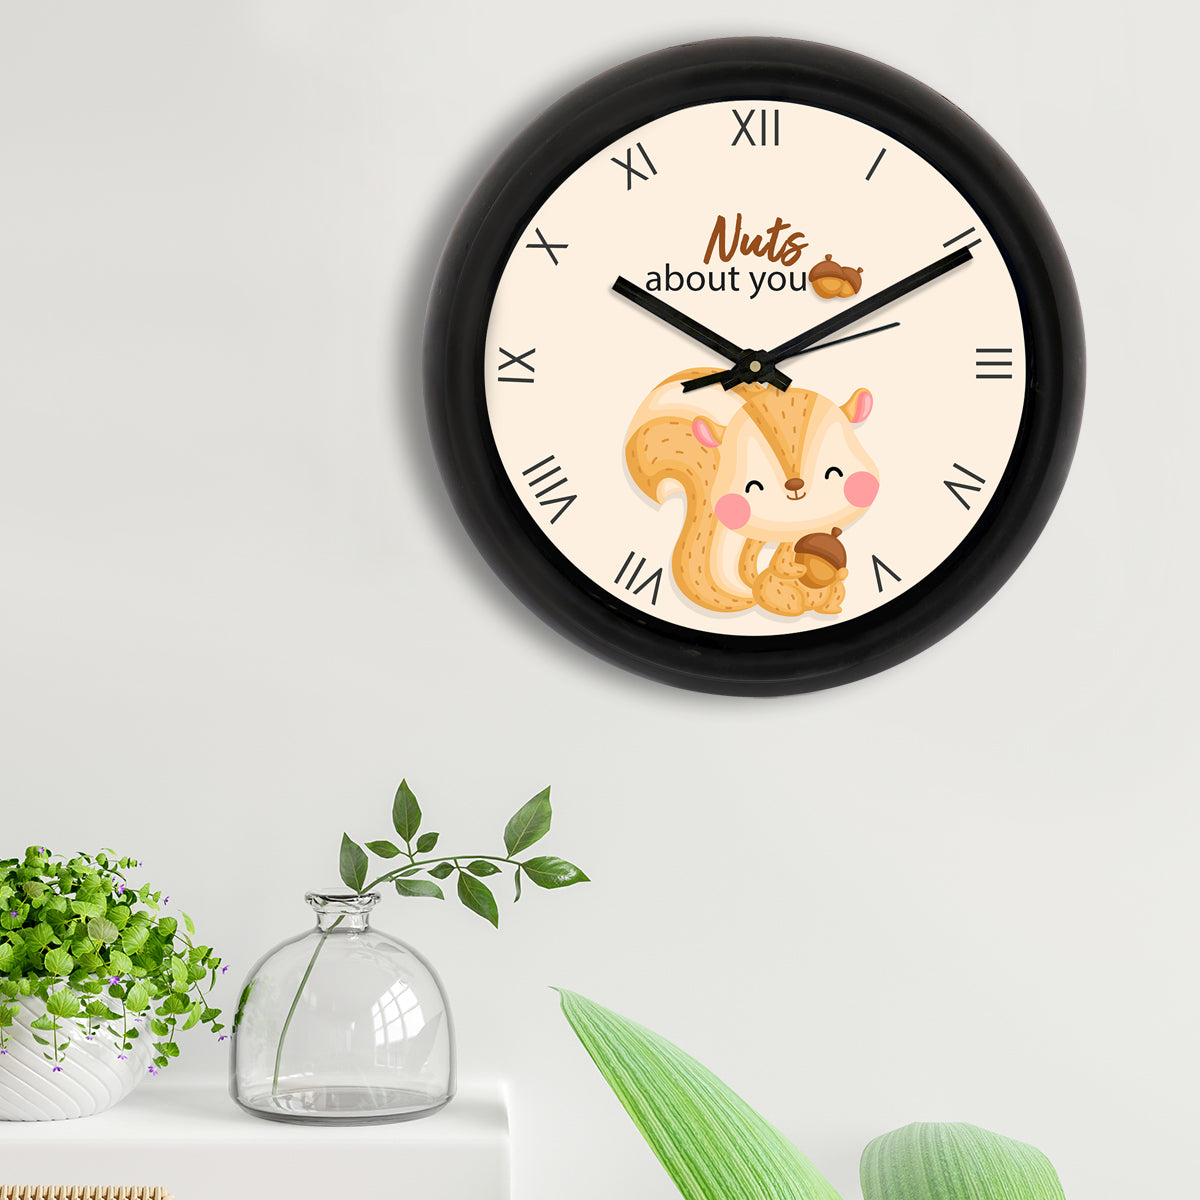 "Nuts About You" Designer Round Analog Black Wall Clock 2